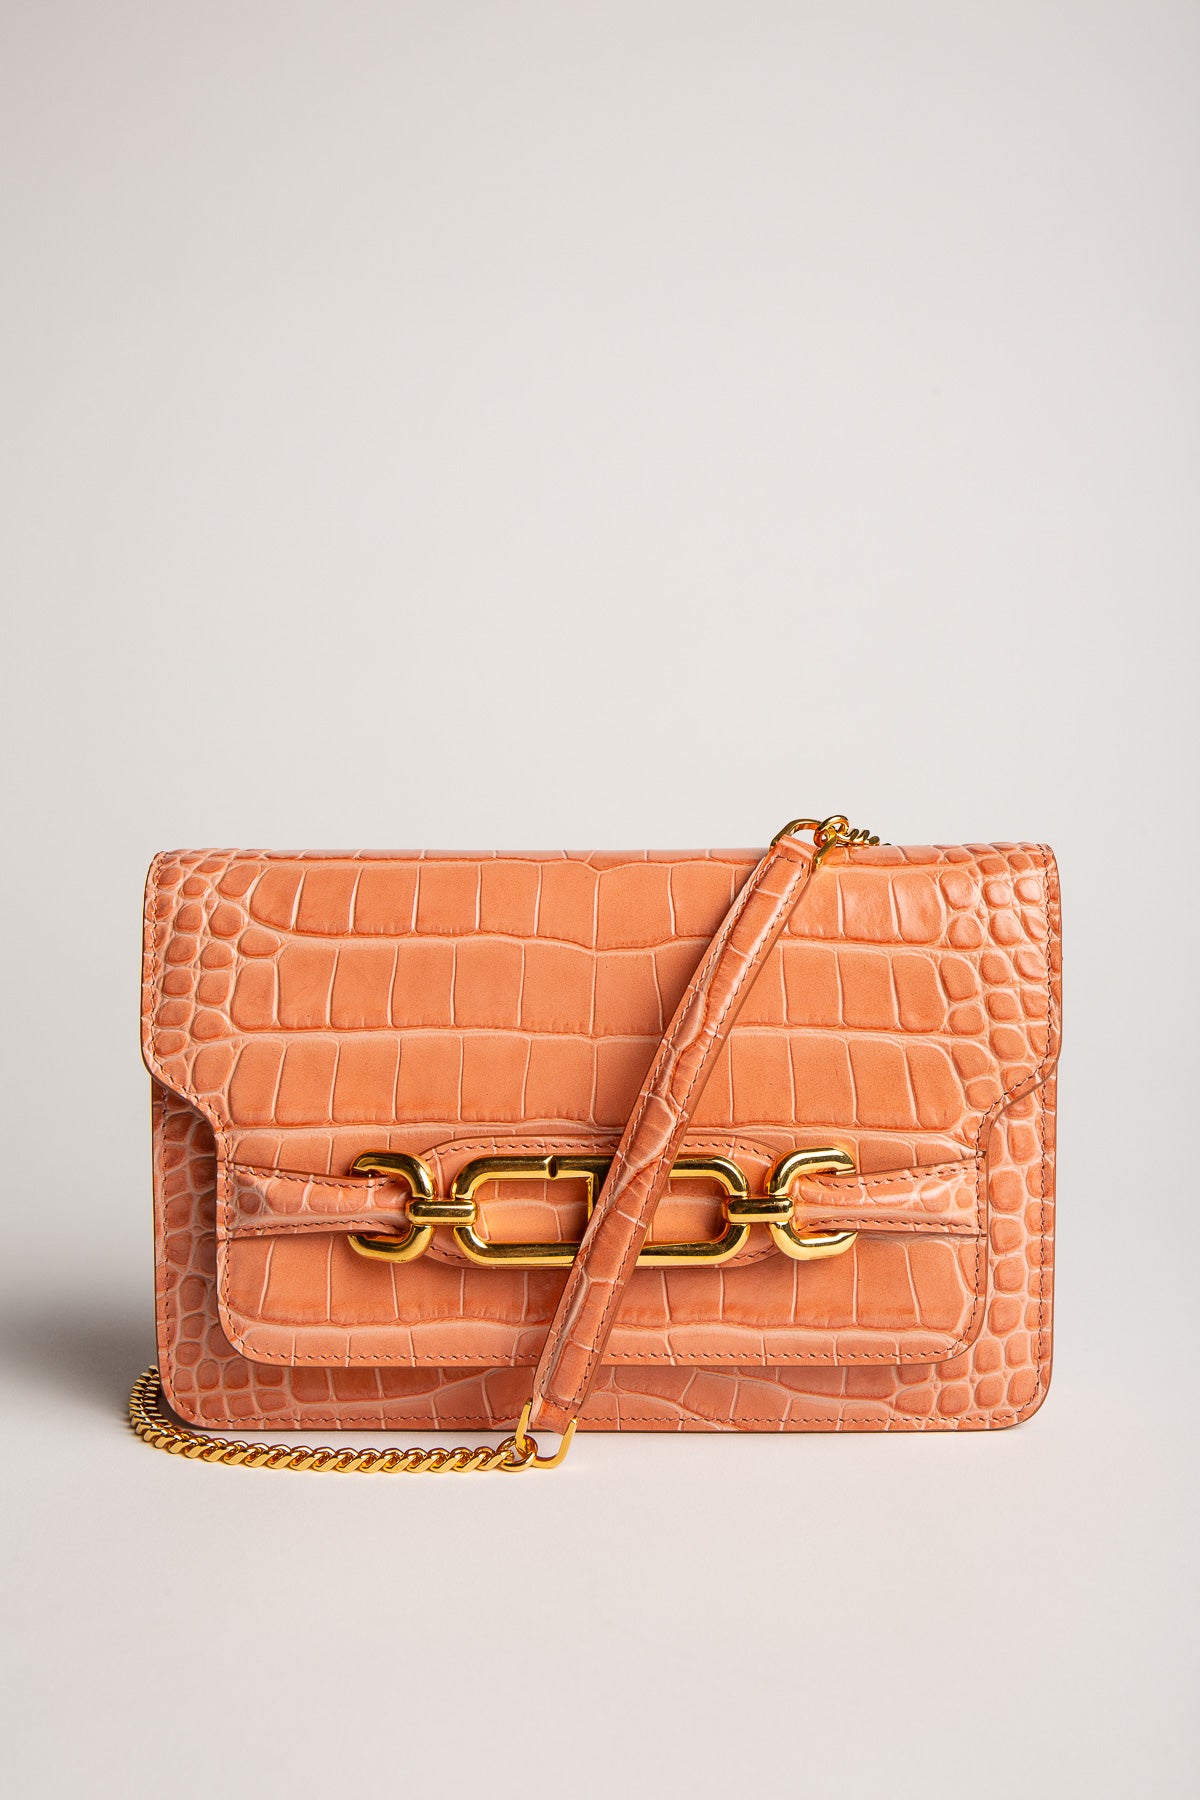 TOM FORD | STAMPED CROCODILE LEATHER WHITNEY SMALL SHOULDER BAG